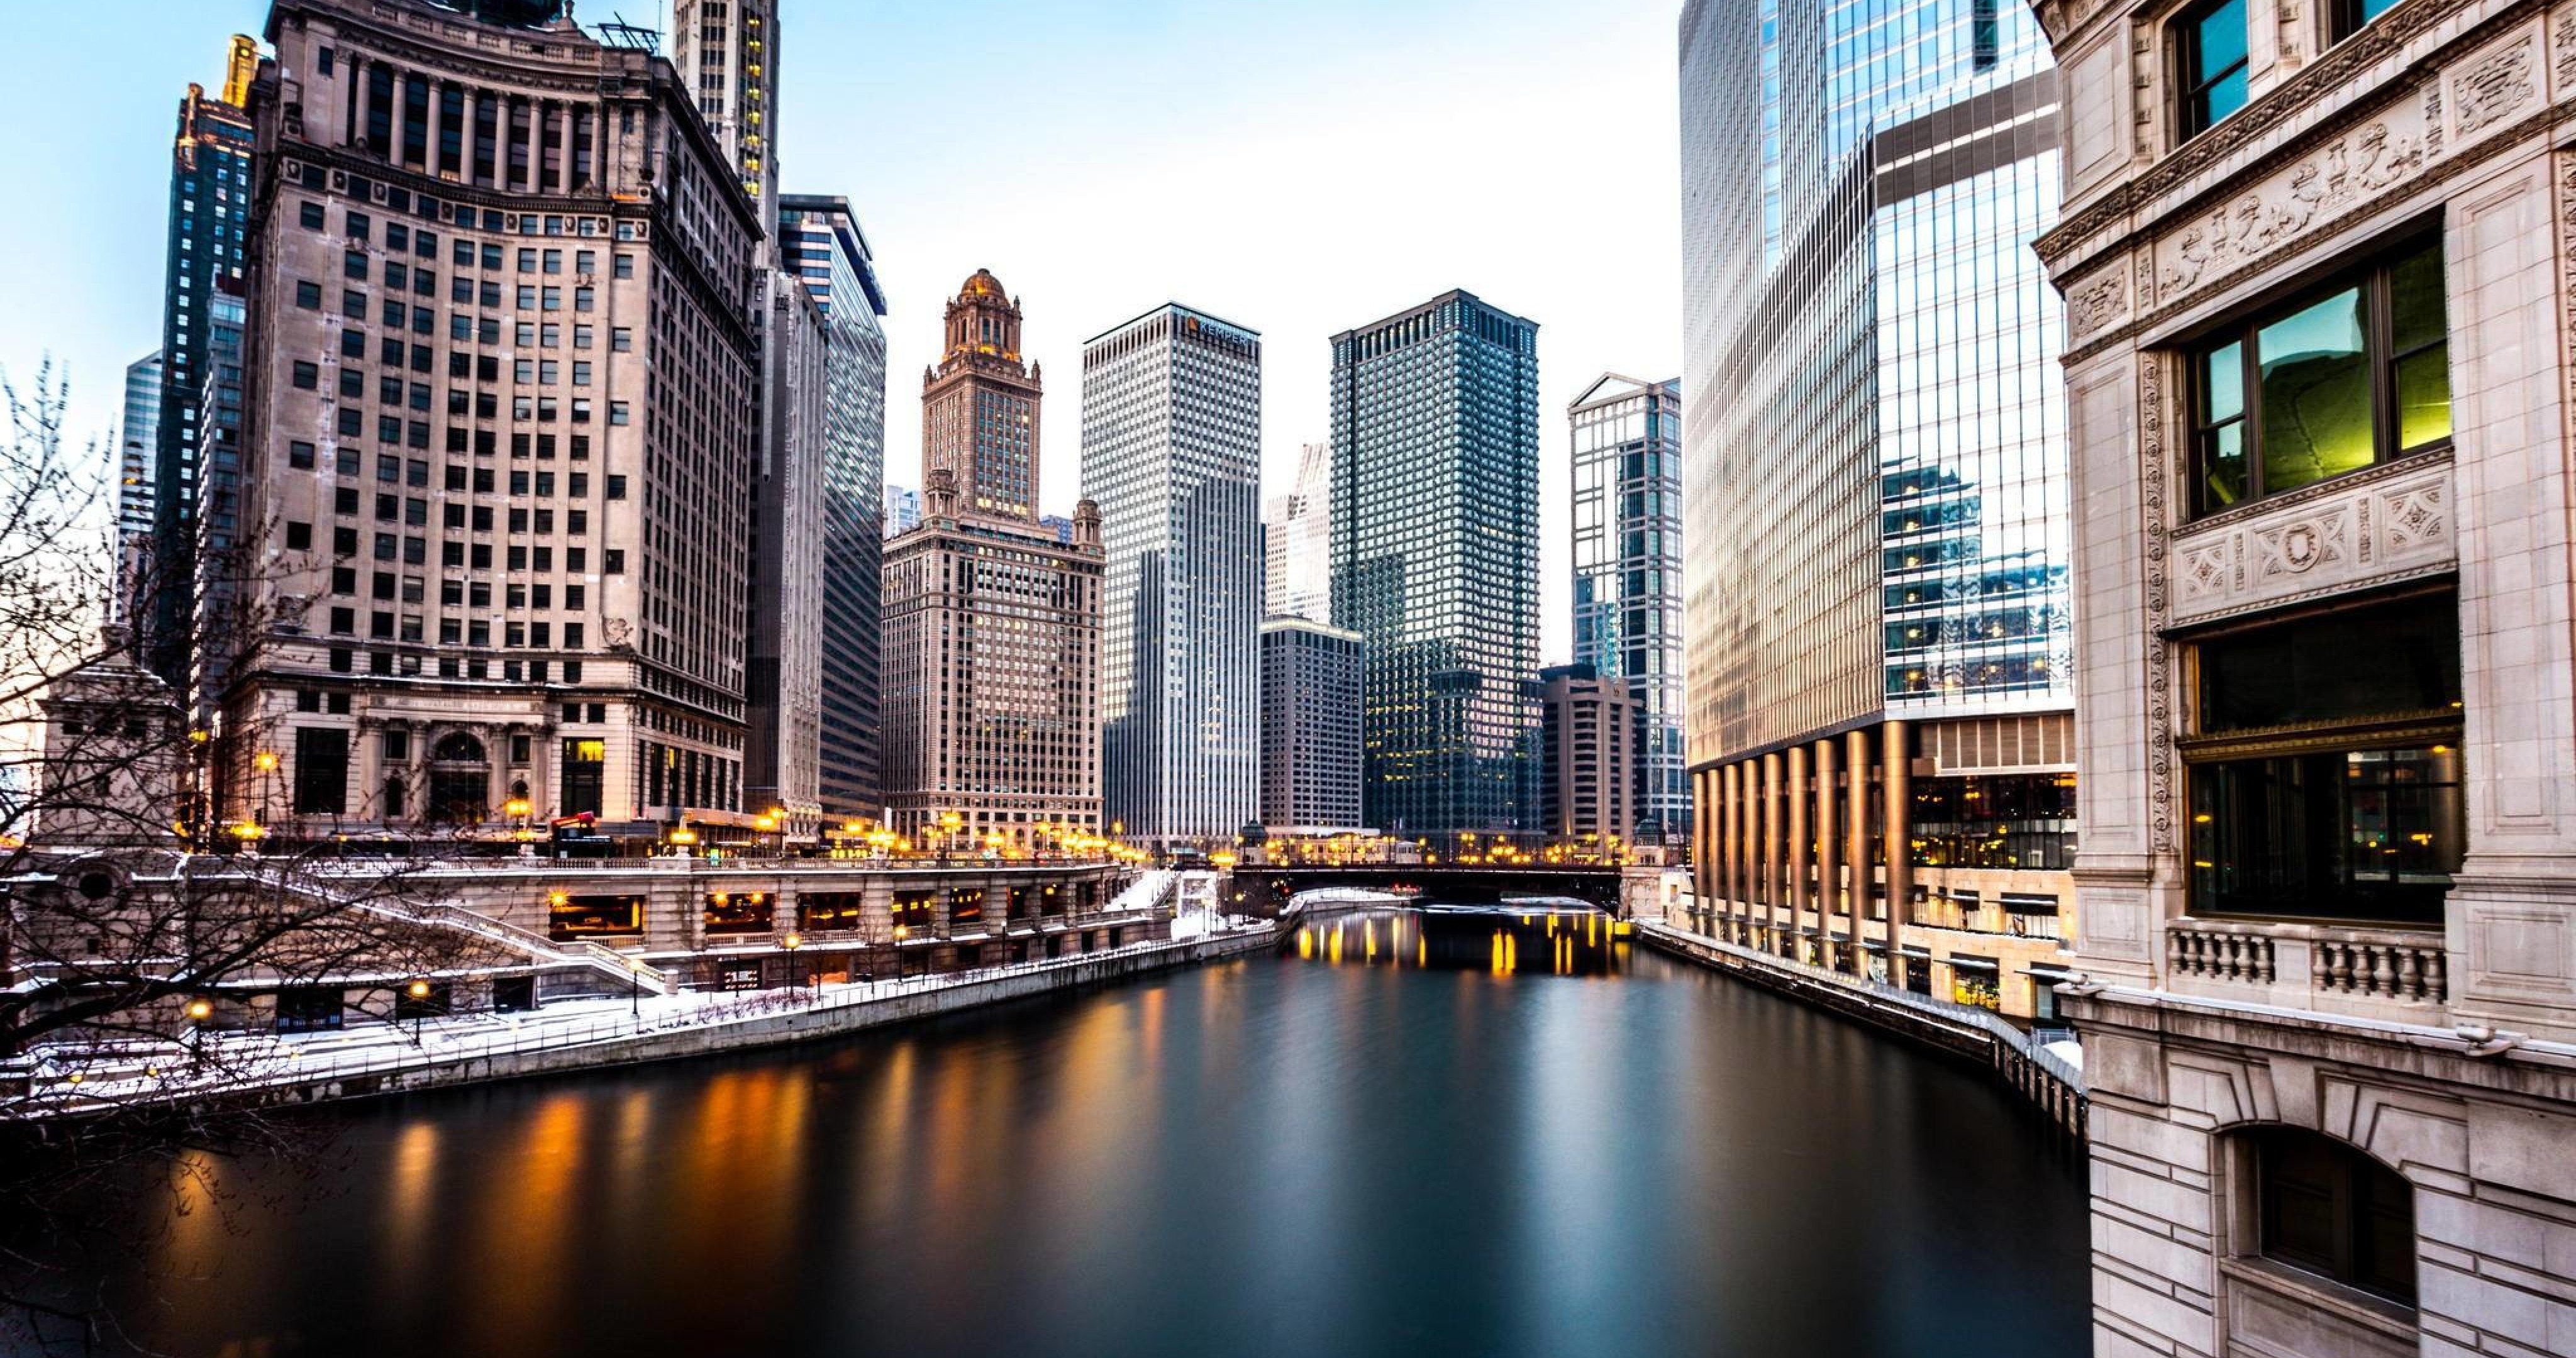 river in chicago 4k ultra HD wallpaper High quality walls